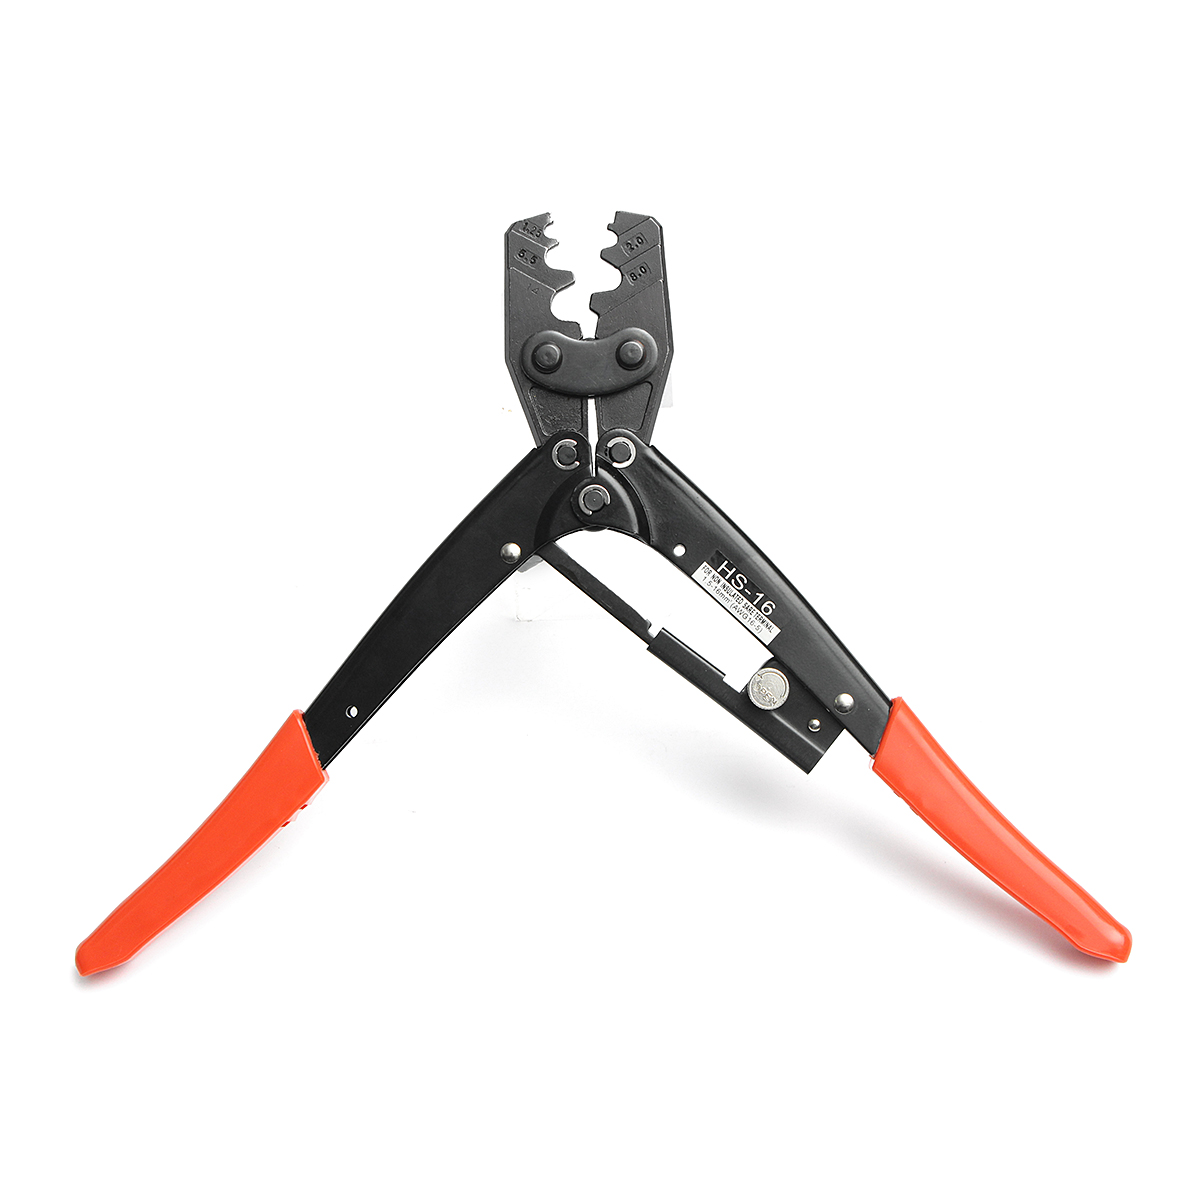 50-Amp-125-16-mm2-Plug-Cable-Crimping-Tool-For-Wire-Crimper-Terminals-Links-1131124-4